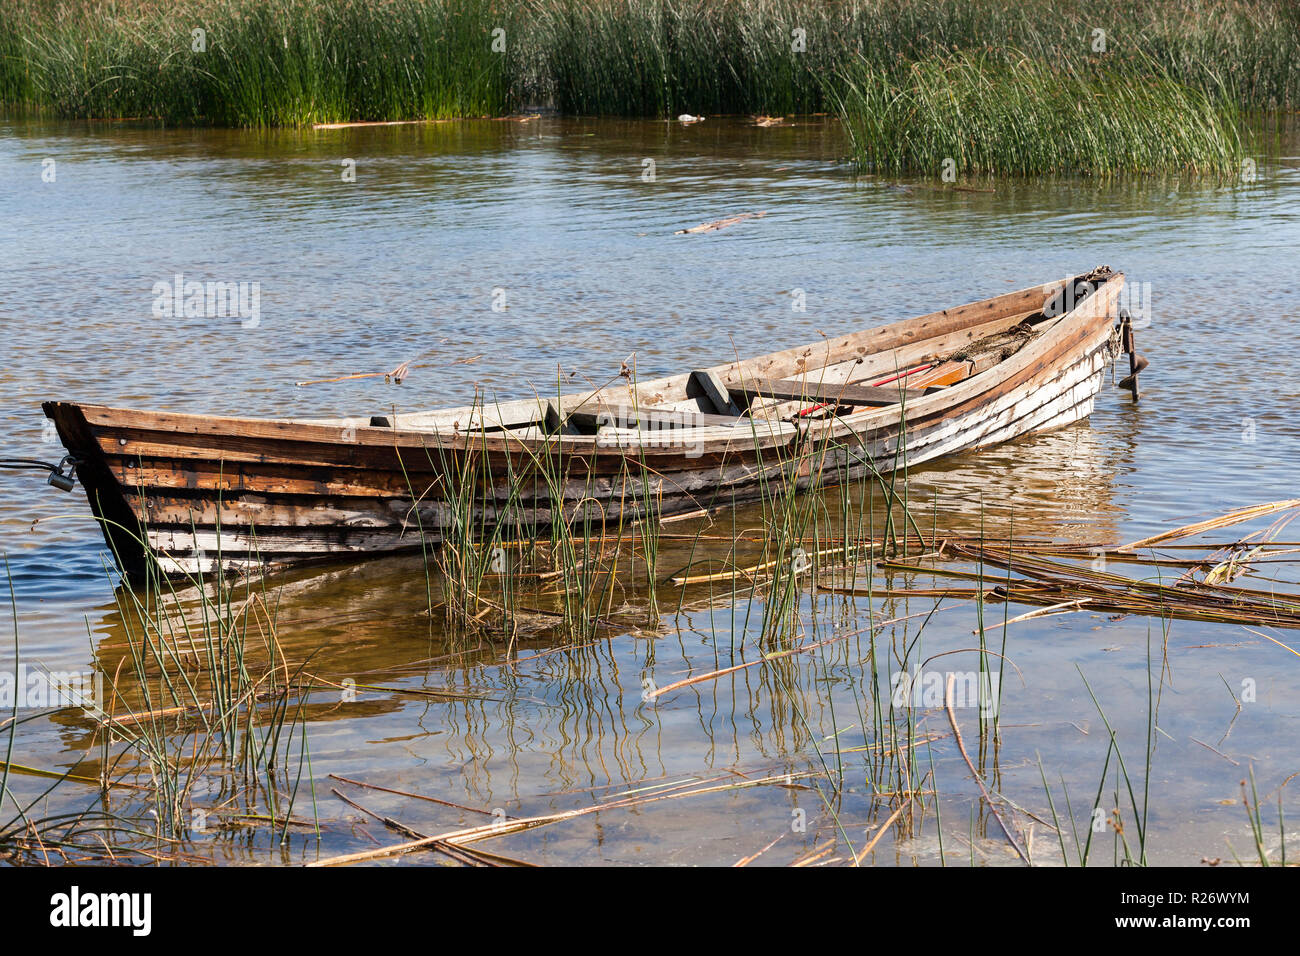 old wooden boat near the lake, used by local people for fishing